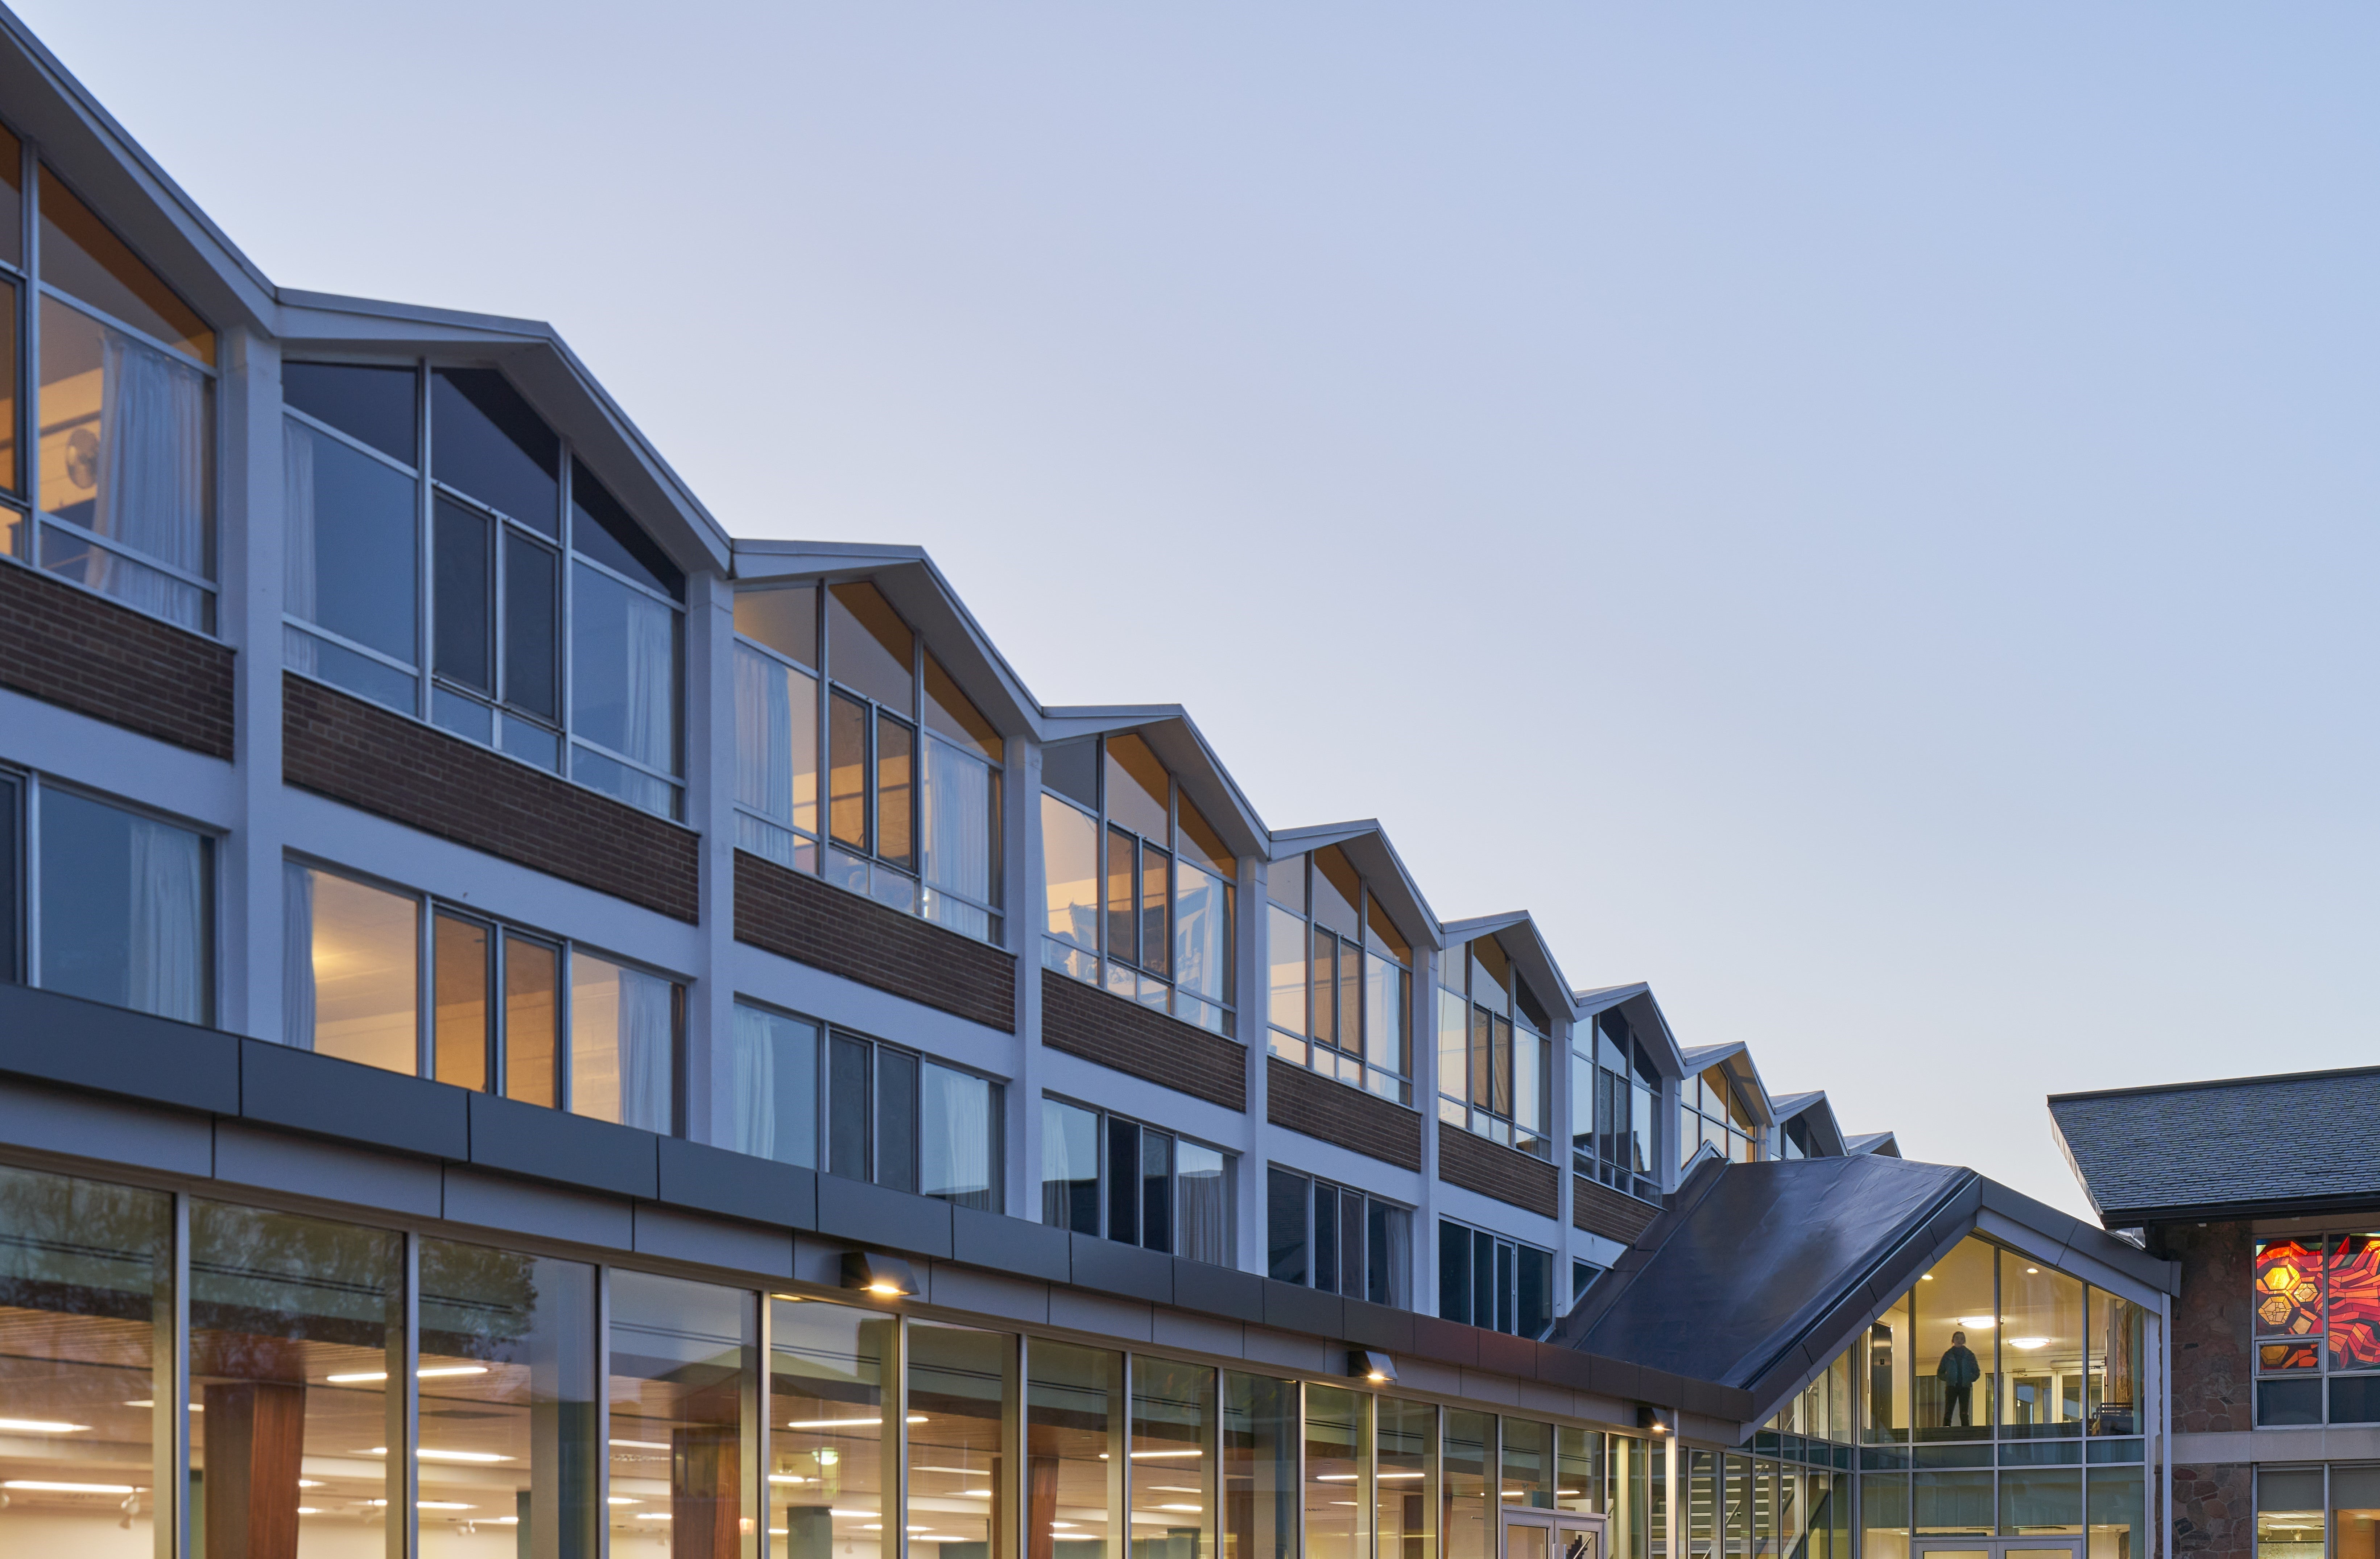 A view of the Grebel residence building at dusk, featuring its iconic peaked rooves.